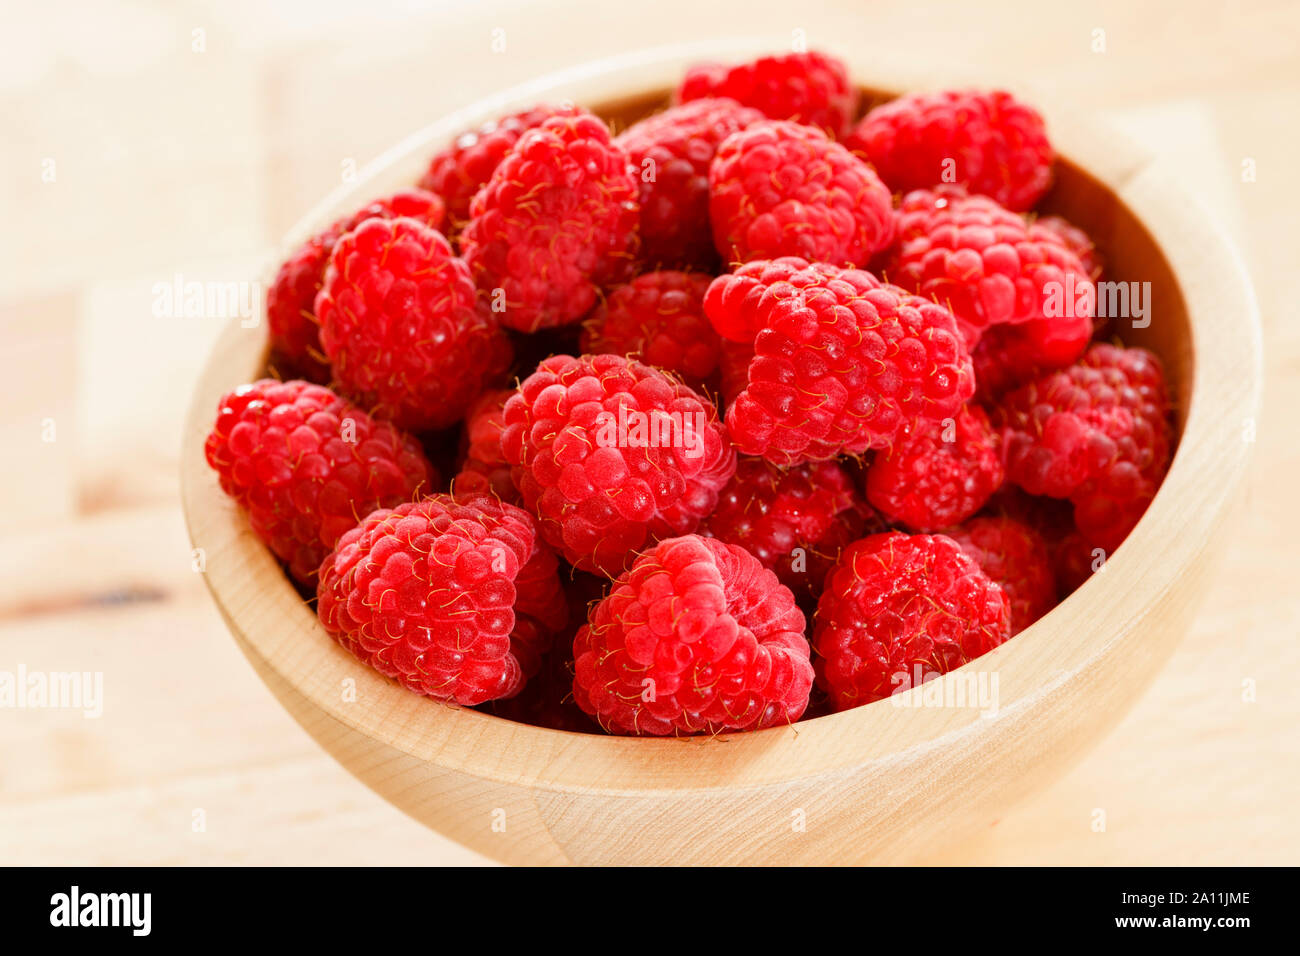 Raspberries in a bowl, close up Stock Photo